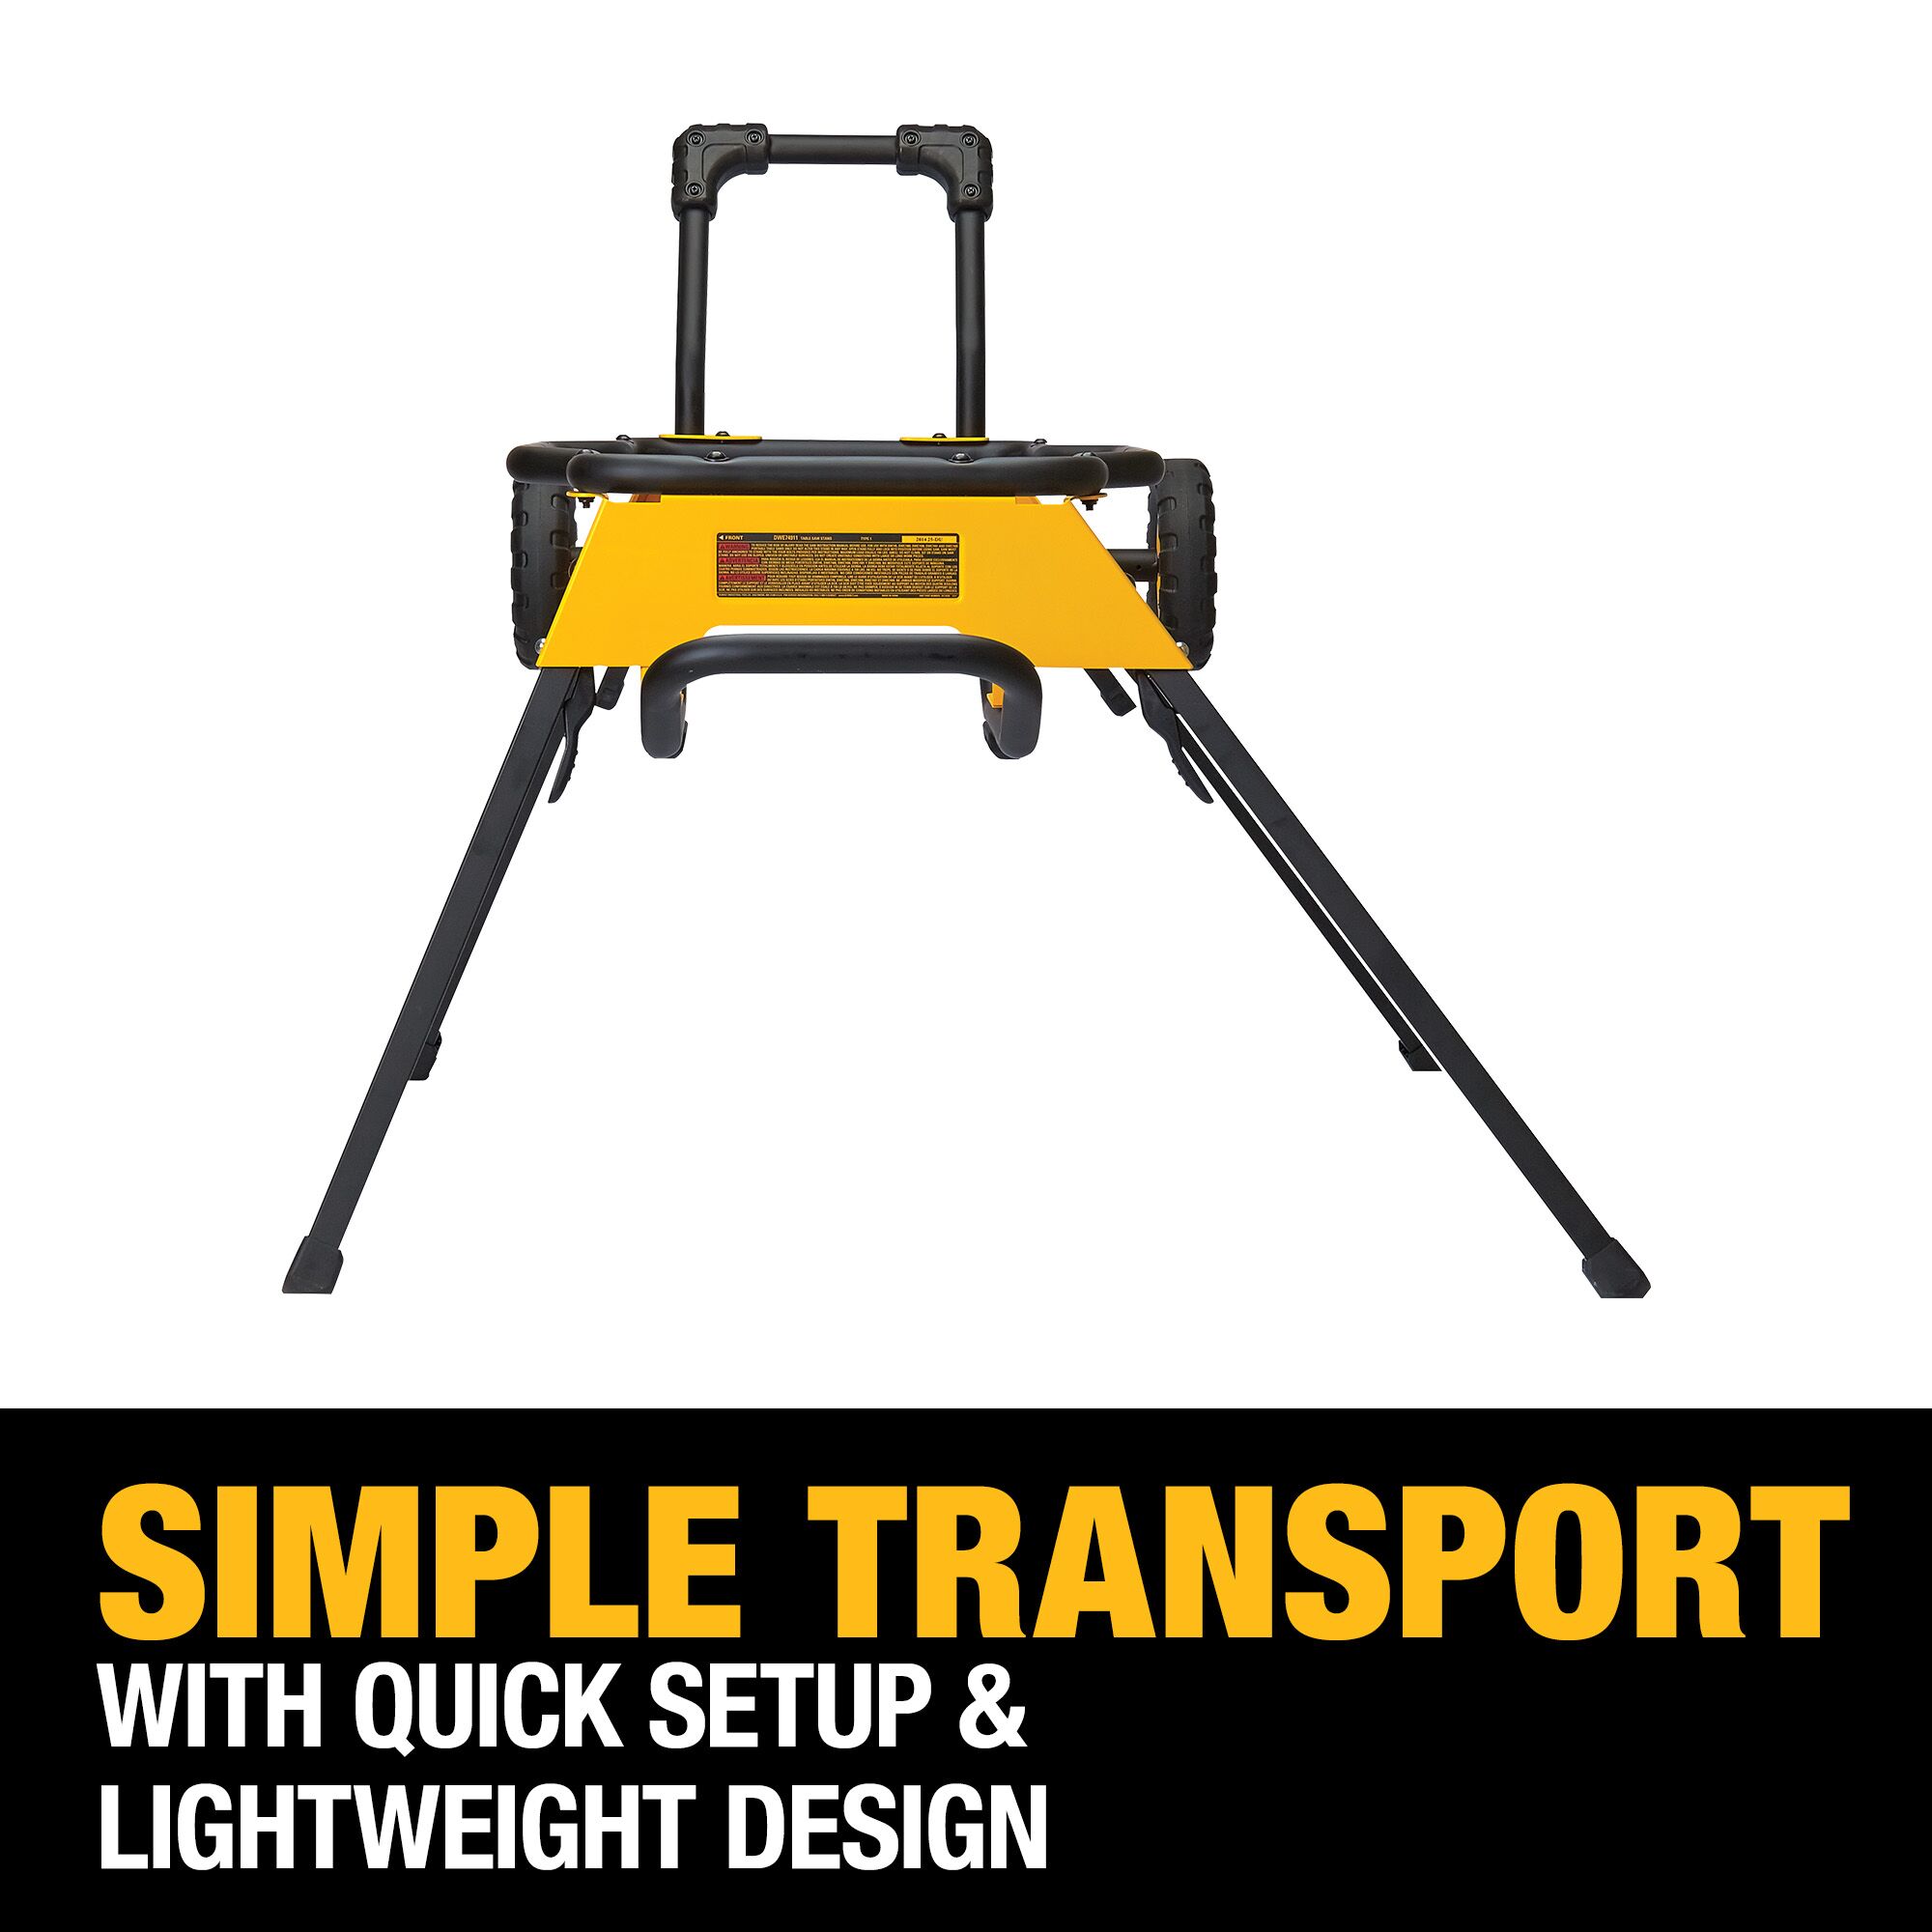 DEWALT Steel Rolling Table Saw Stand at